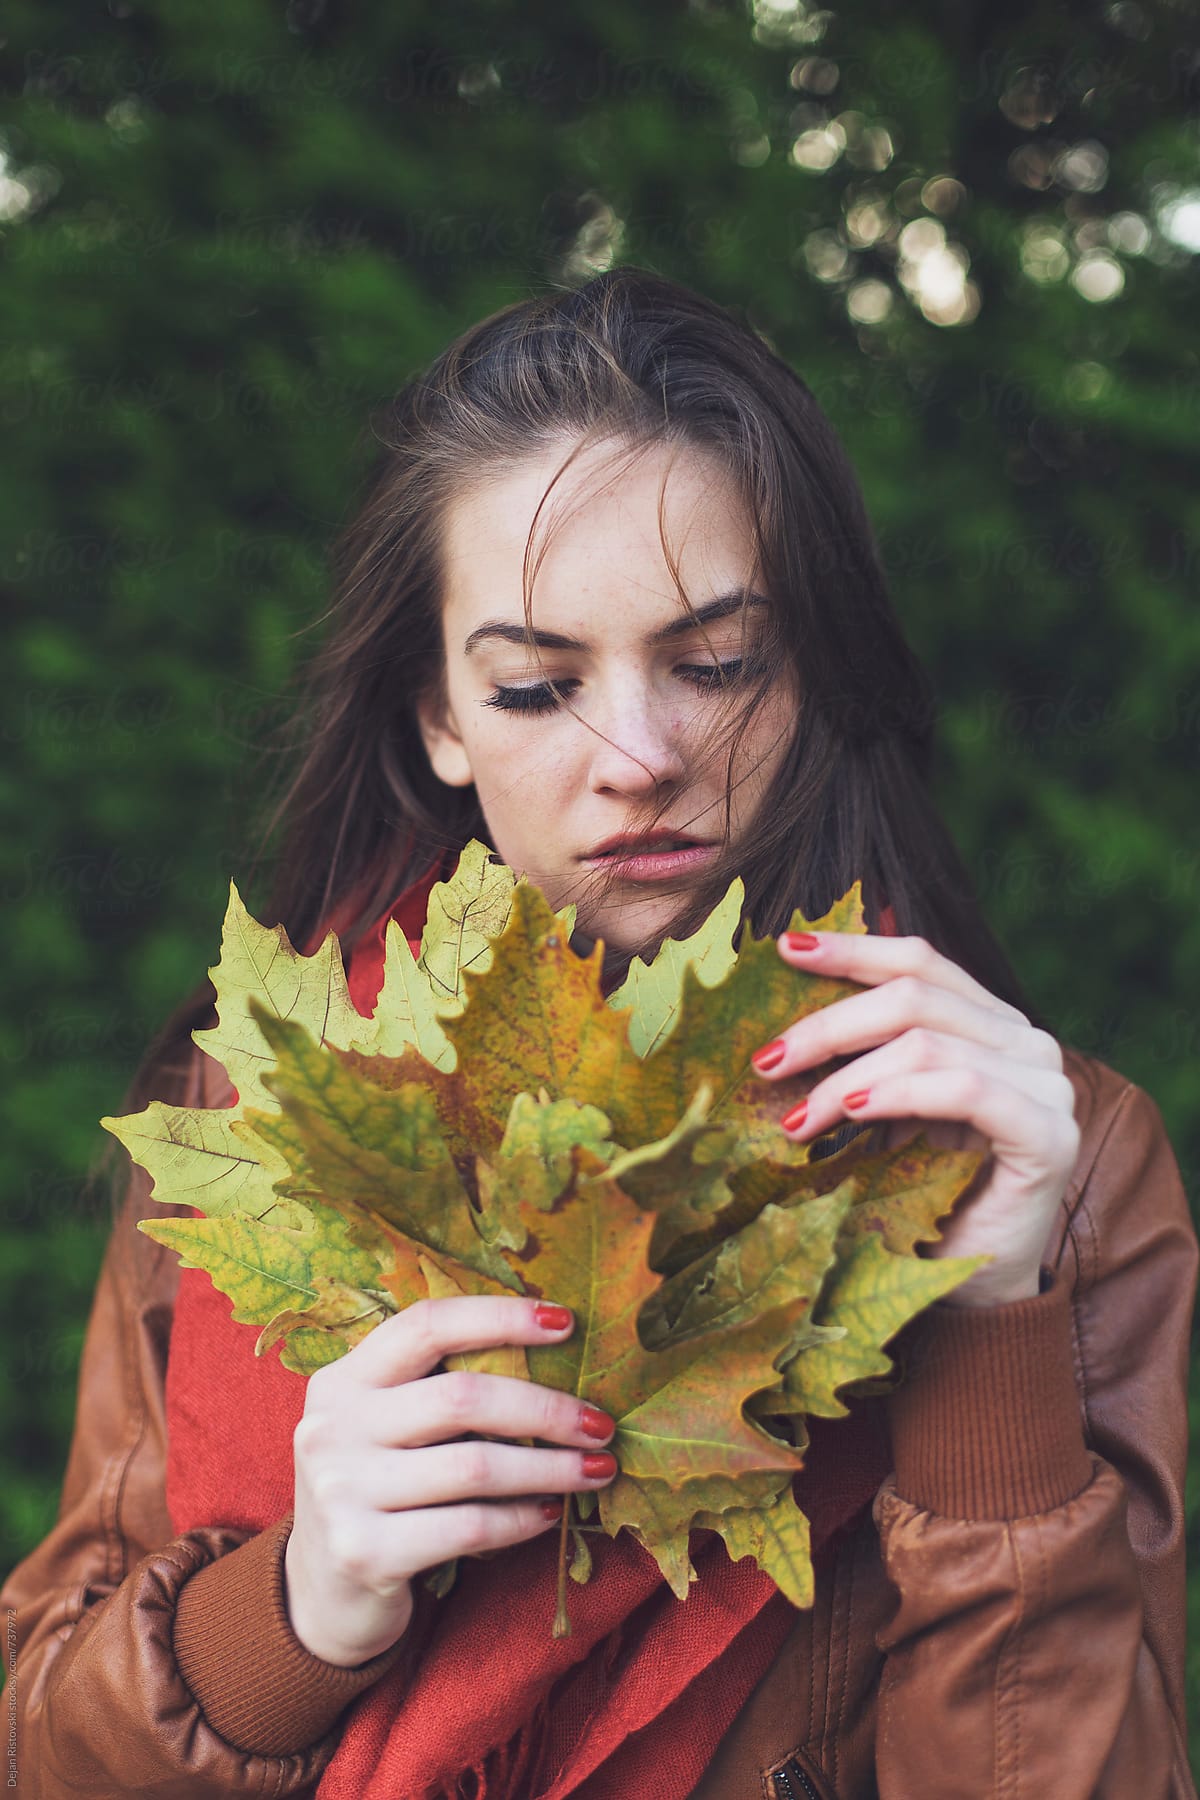 Young Teen Holding Bunch Of Maple Leafs by Dejan Ristovski